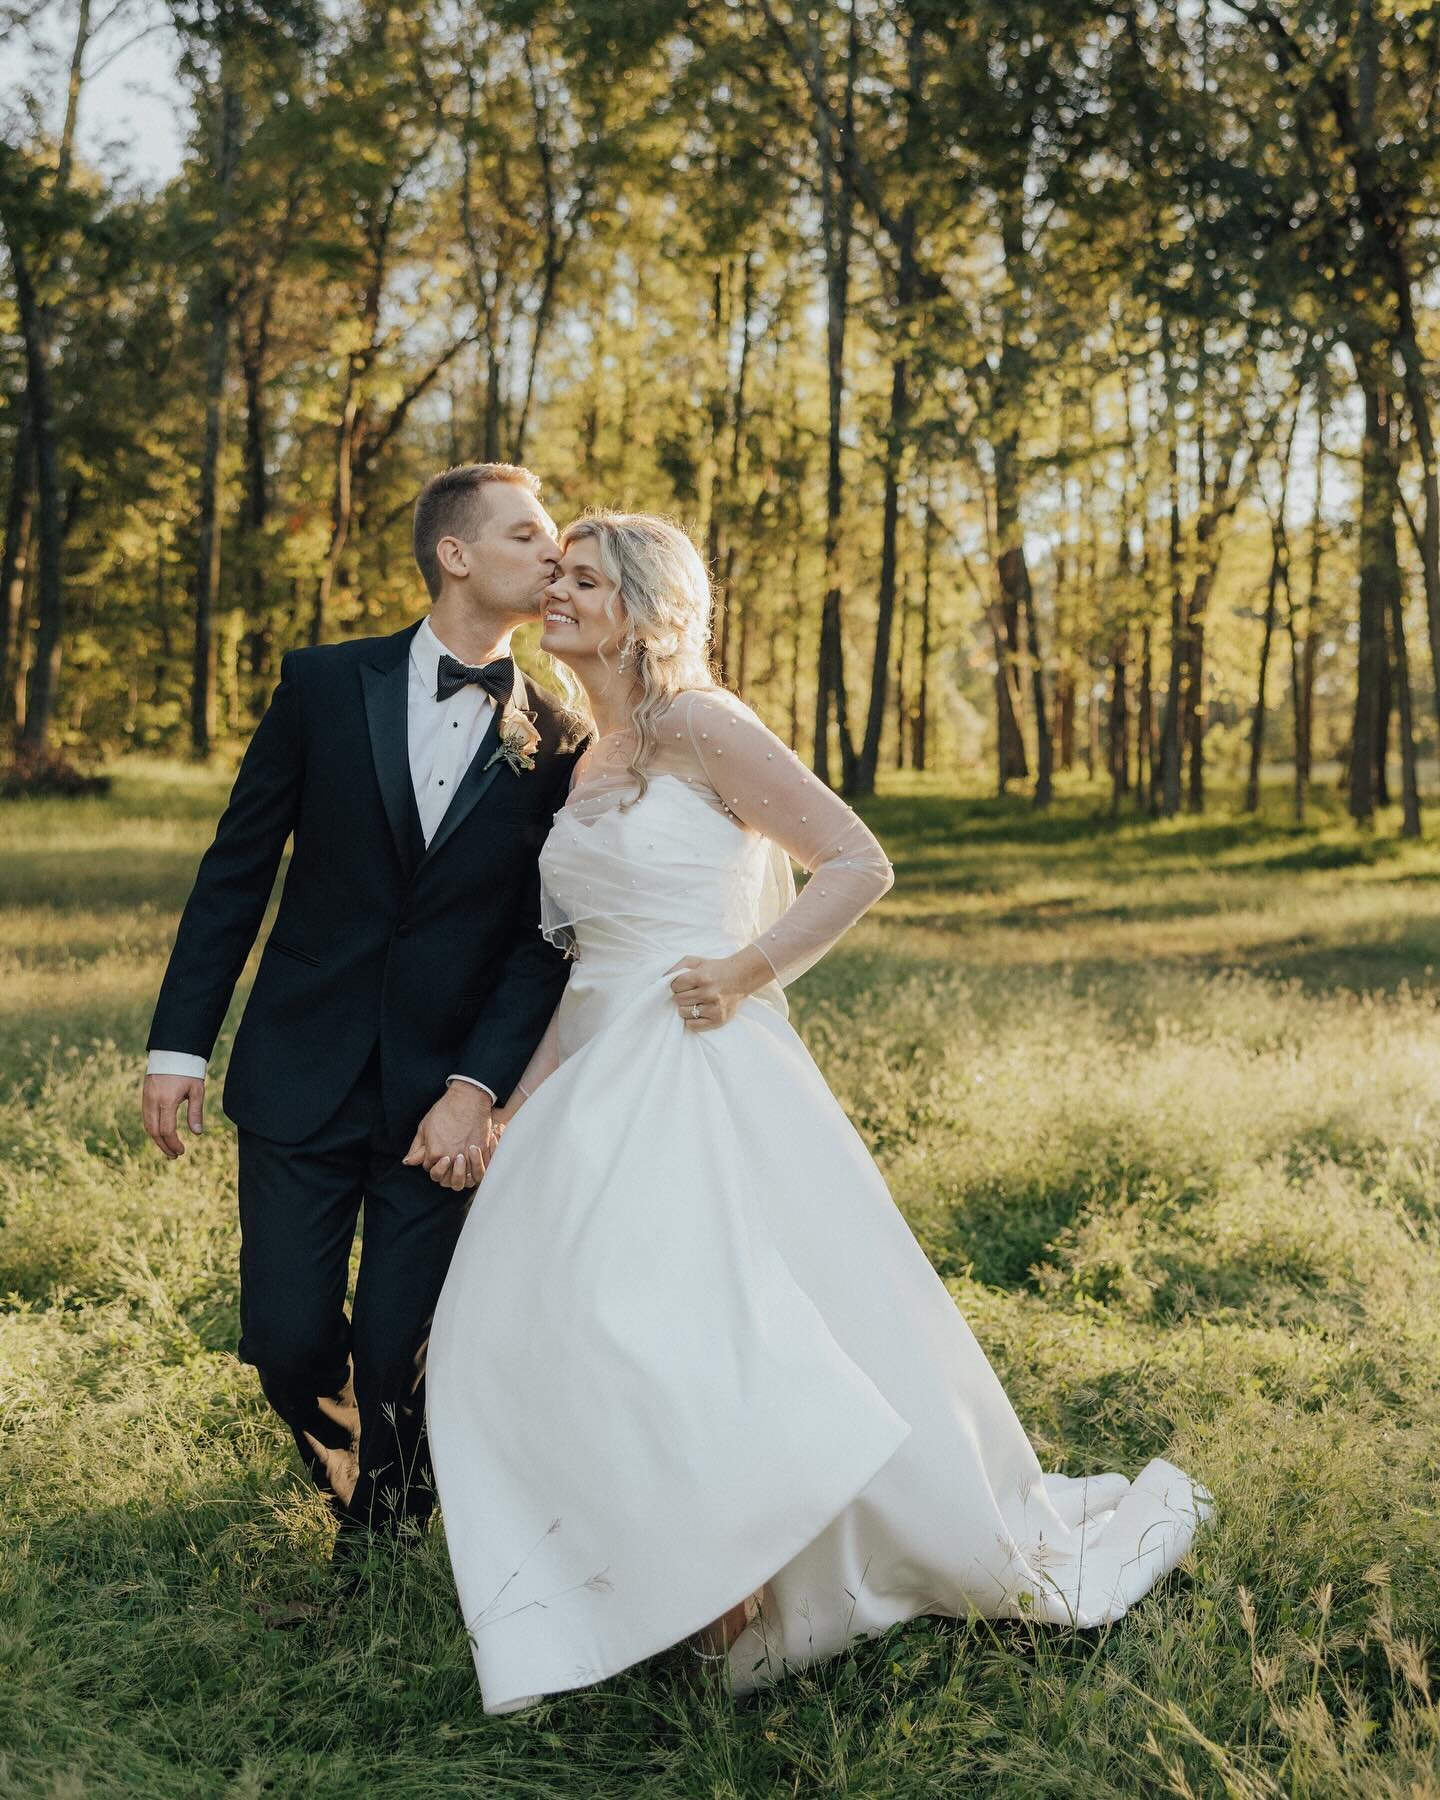 Better late than never&hellip;flashing back to this past fall when Katelyn and Tyler became Mr + Mrs Wills!&nbsp;

The amazing Vendors:&nbsp;
Coordinator/Wedding Planner: @pineappleprocessions
Dress Store or Dress :&nbsp;@lovebridalboutique
Florist: 